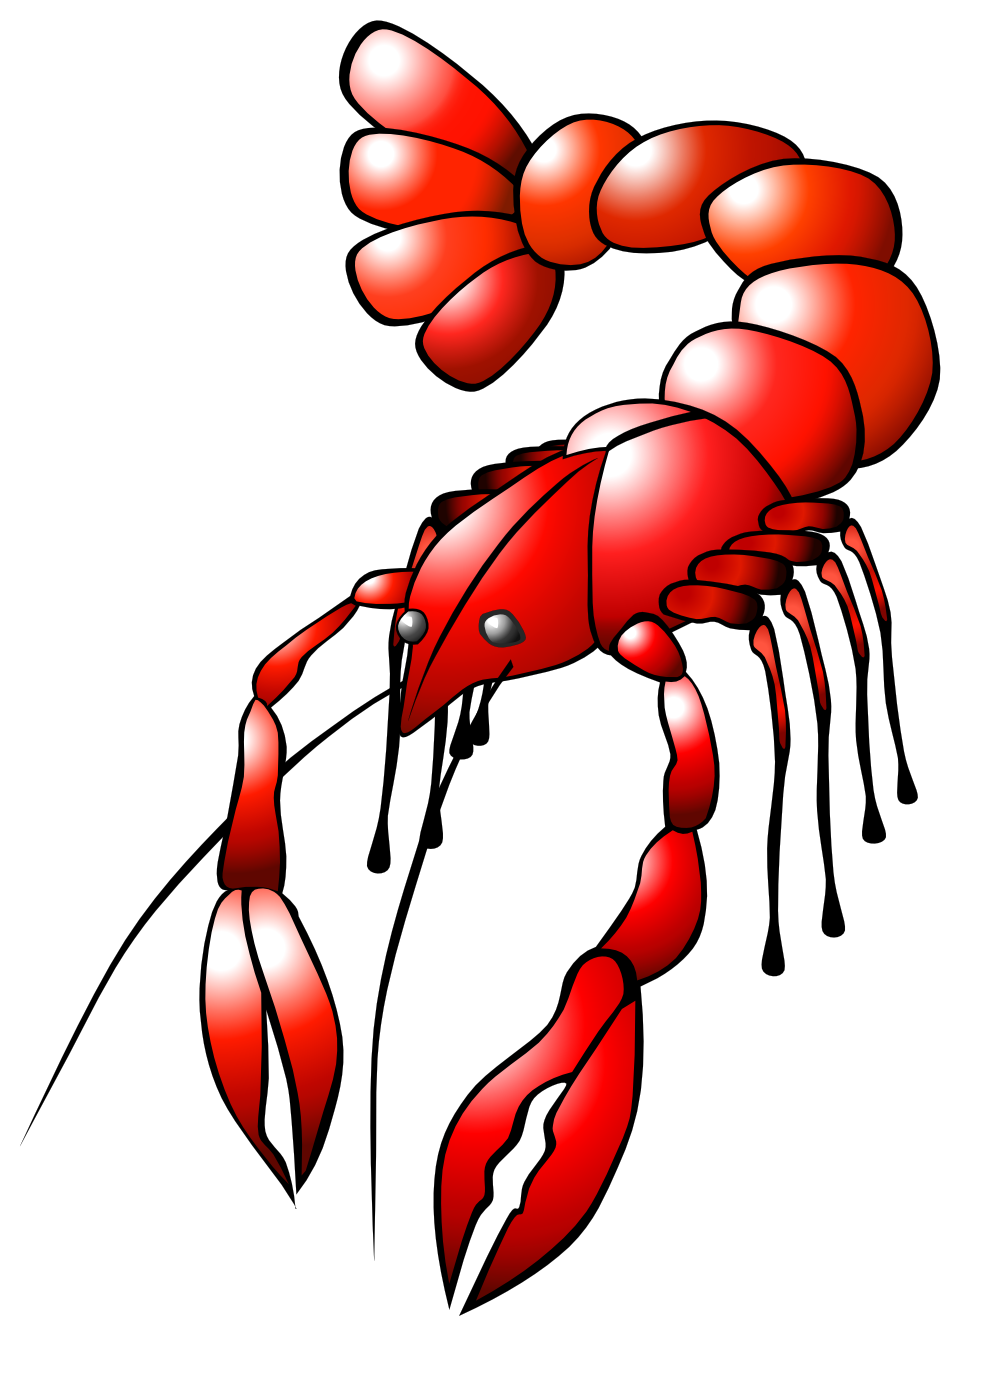 Clip Art: Crawfish openclipart.org commons.